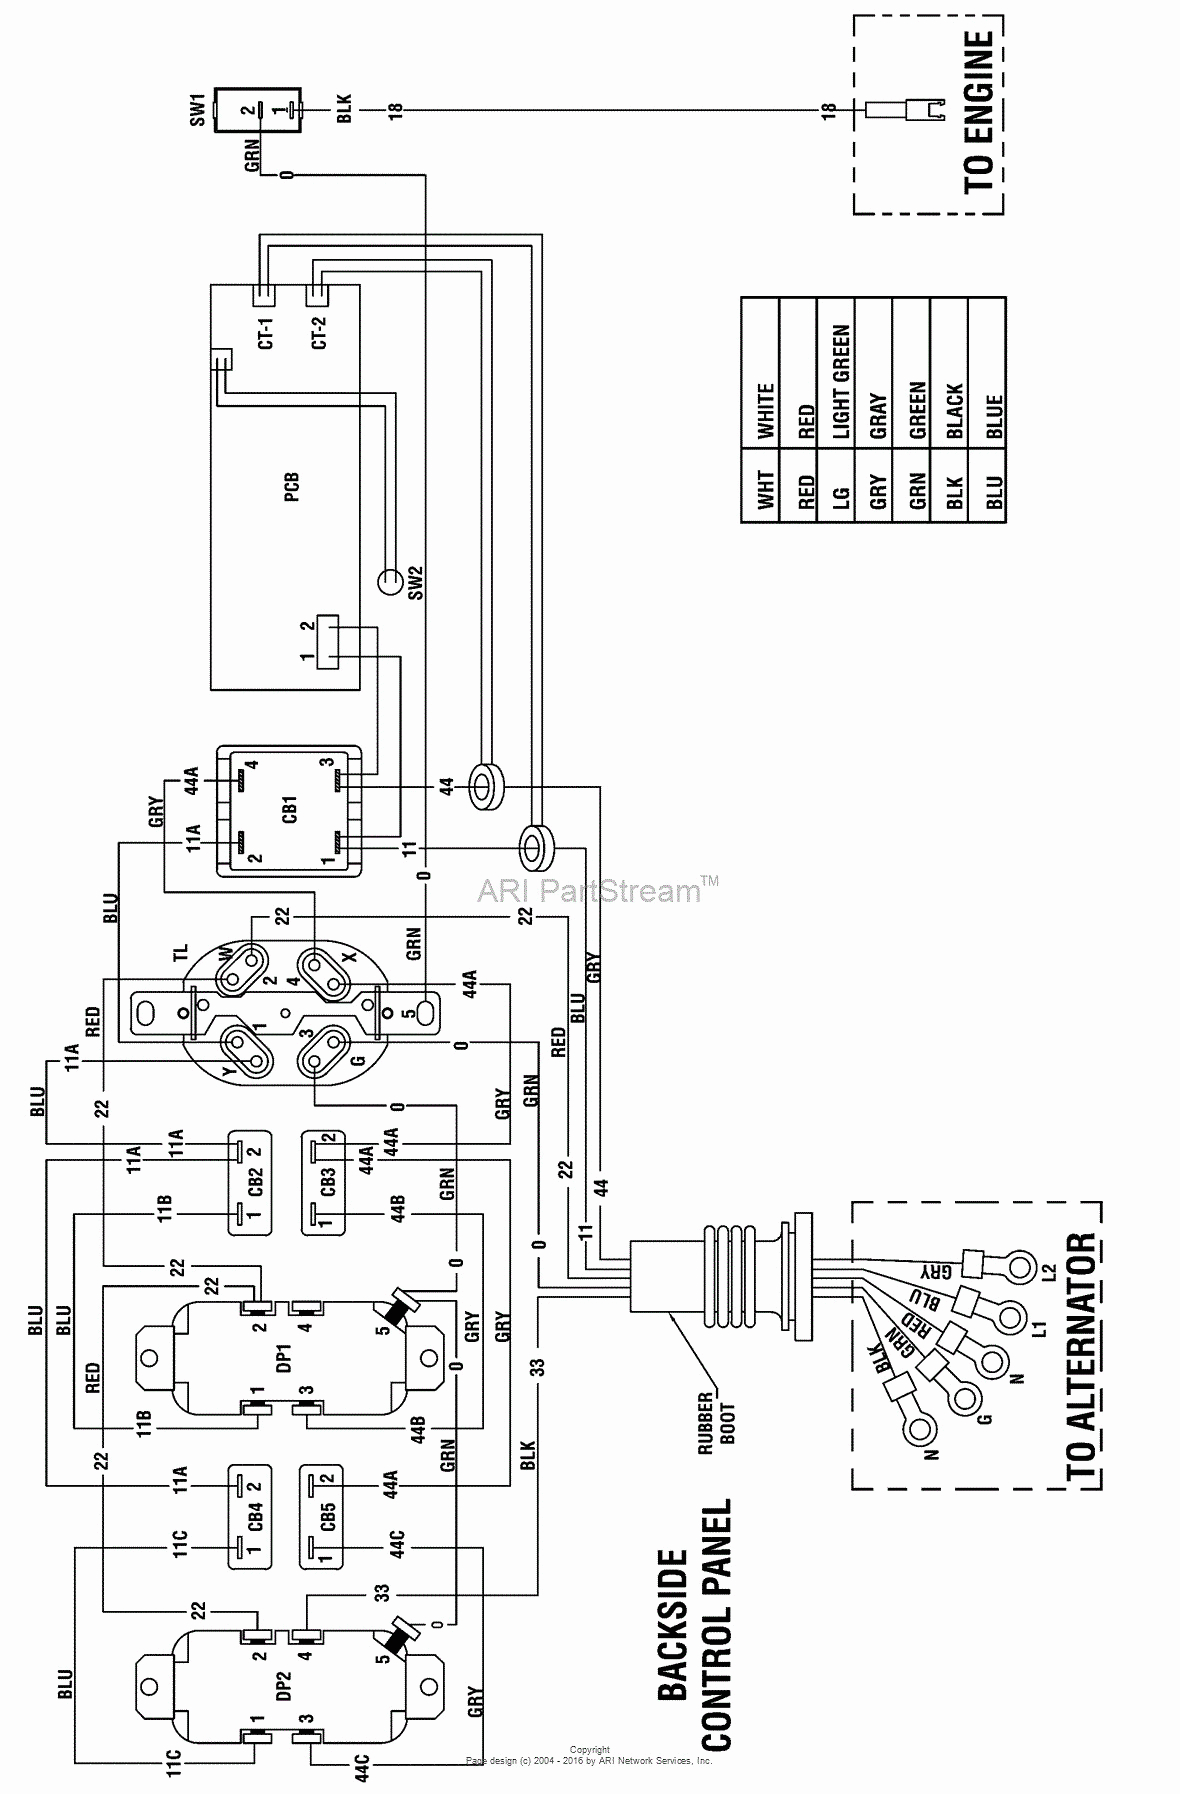 Briggs And Stratton Ignition Coil Wiring Diagram | Wiring Diagram - Briggs And Stratton Magneto Wiring Diagram